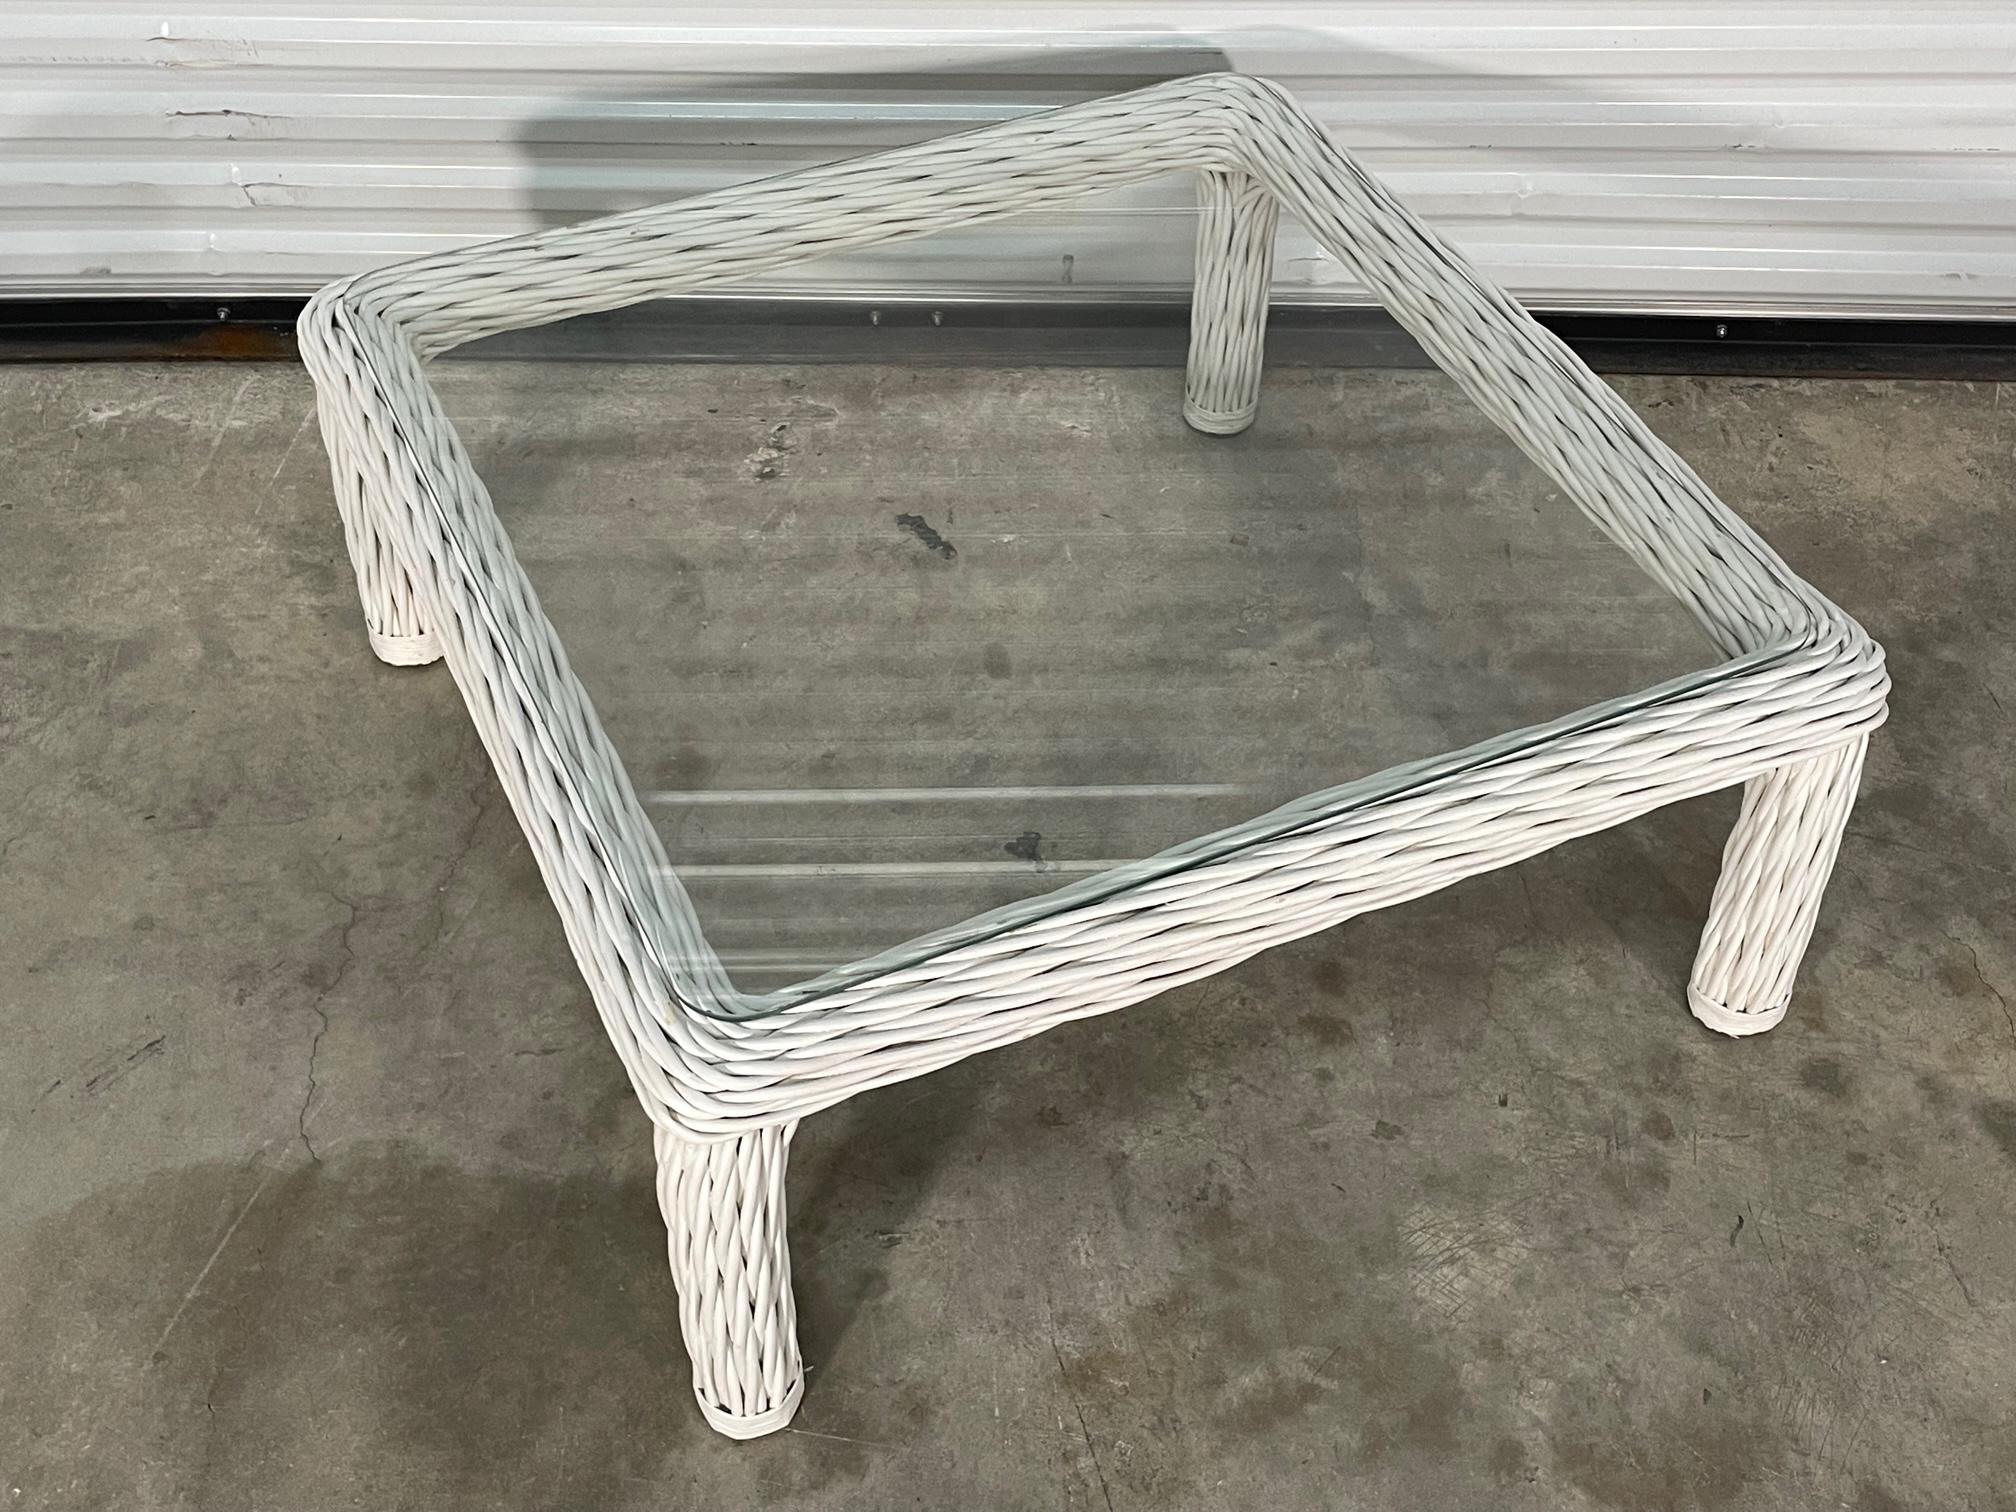 Organic modern coffee table features frame of twisted rattan and glass top. Good condition with imperfections consistent with age, see photos for condition details. We offer professional refinishing services, if interested, send us a message. 
For